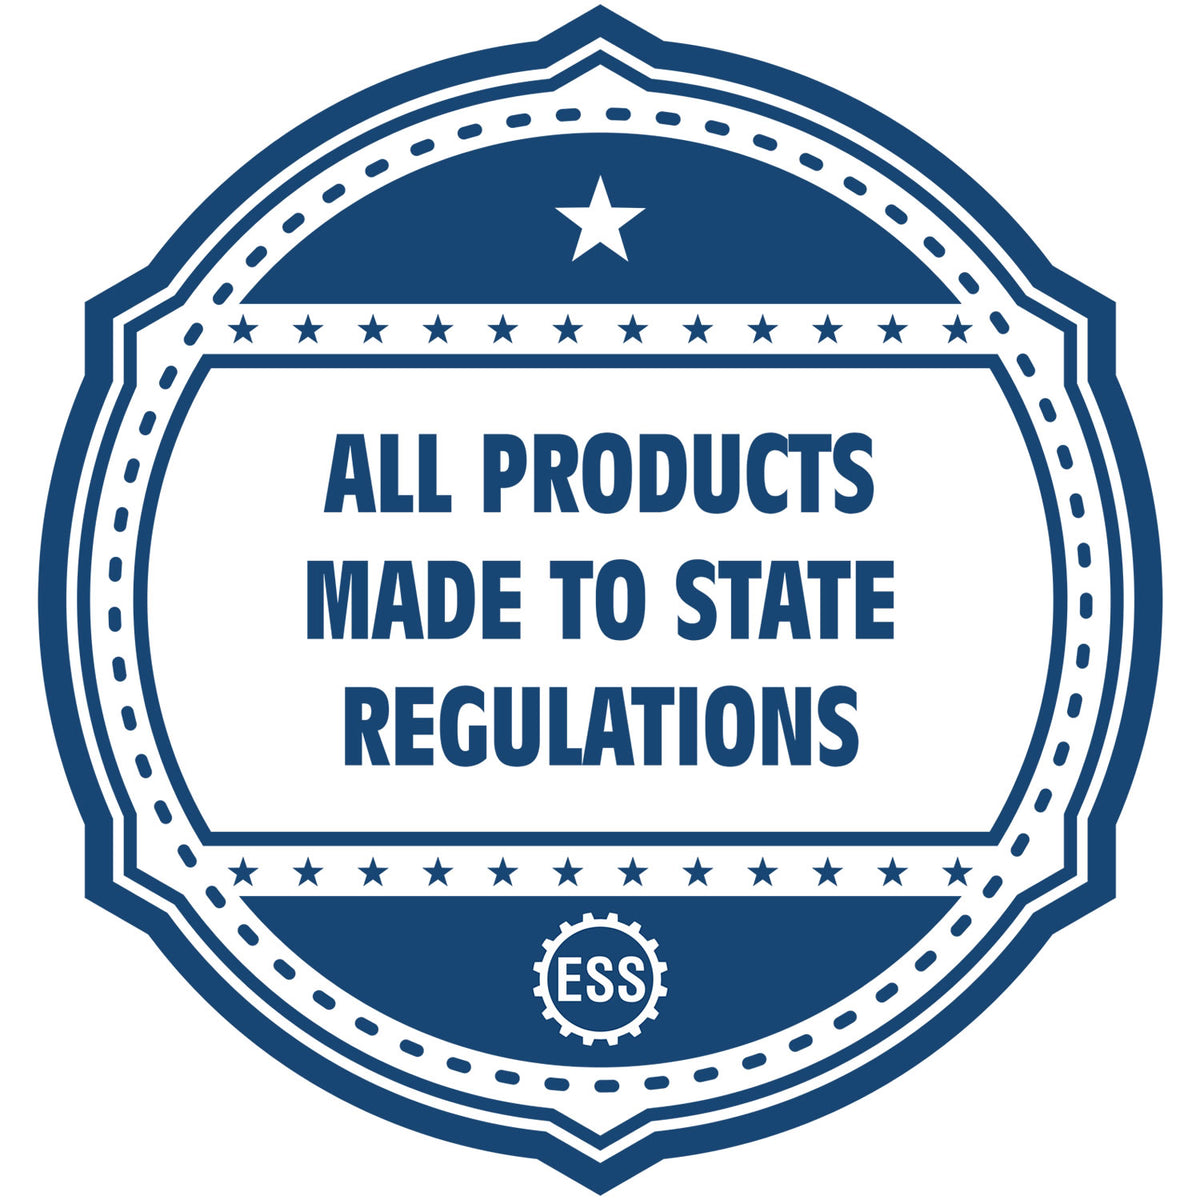 An icon or badge element for the Digital Kentucky Landscape Architect Stamp showing that this product is made in compliance with state regulations.